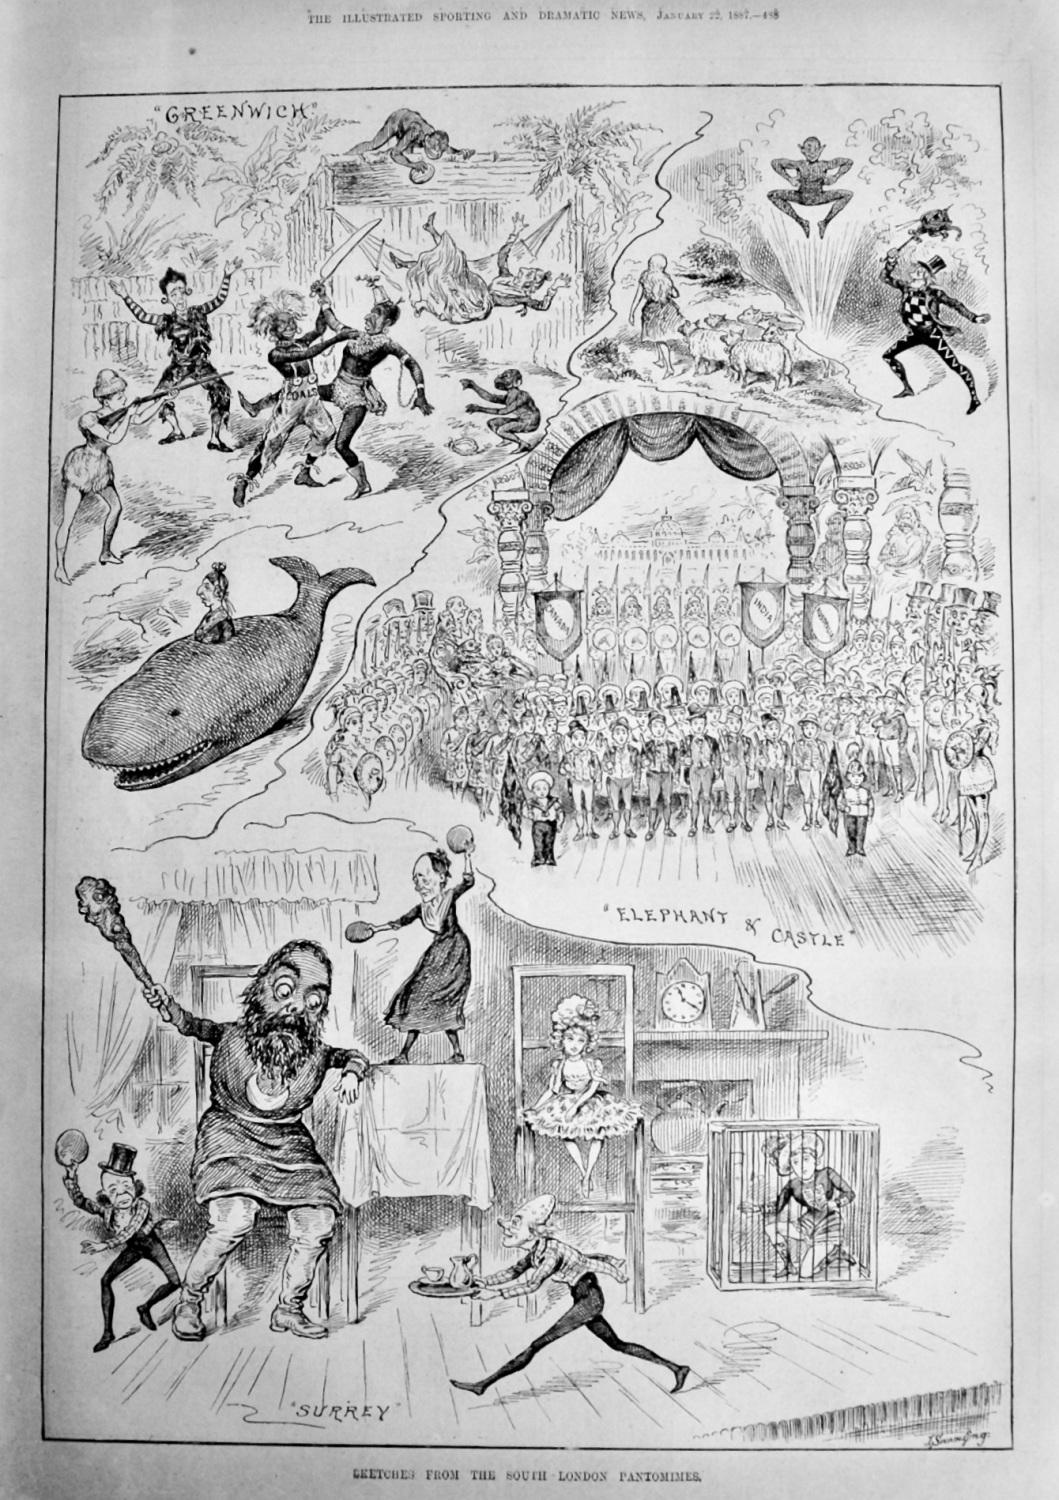 Sketches from the South London Pantomimes.  1887.